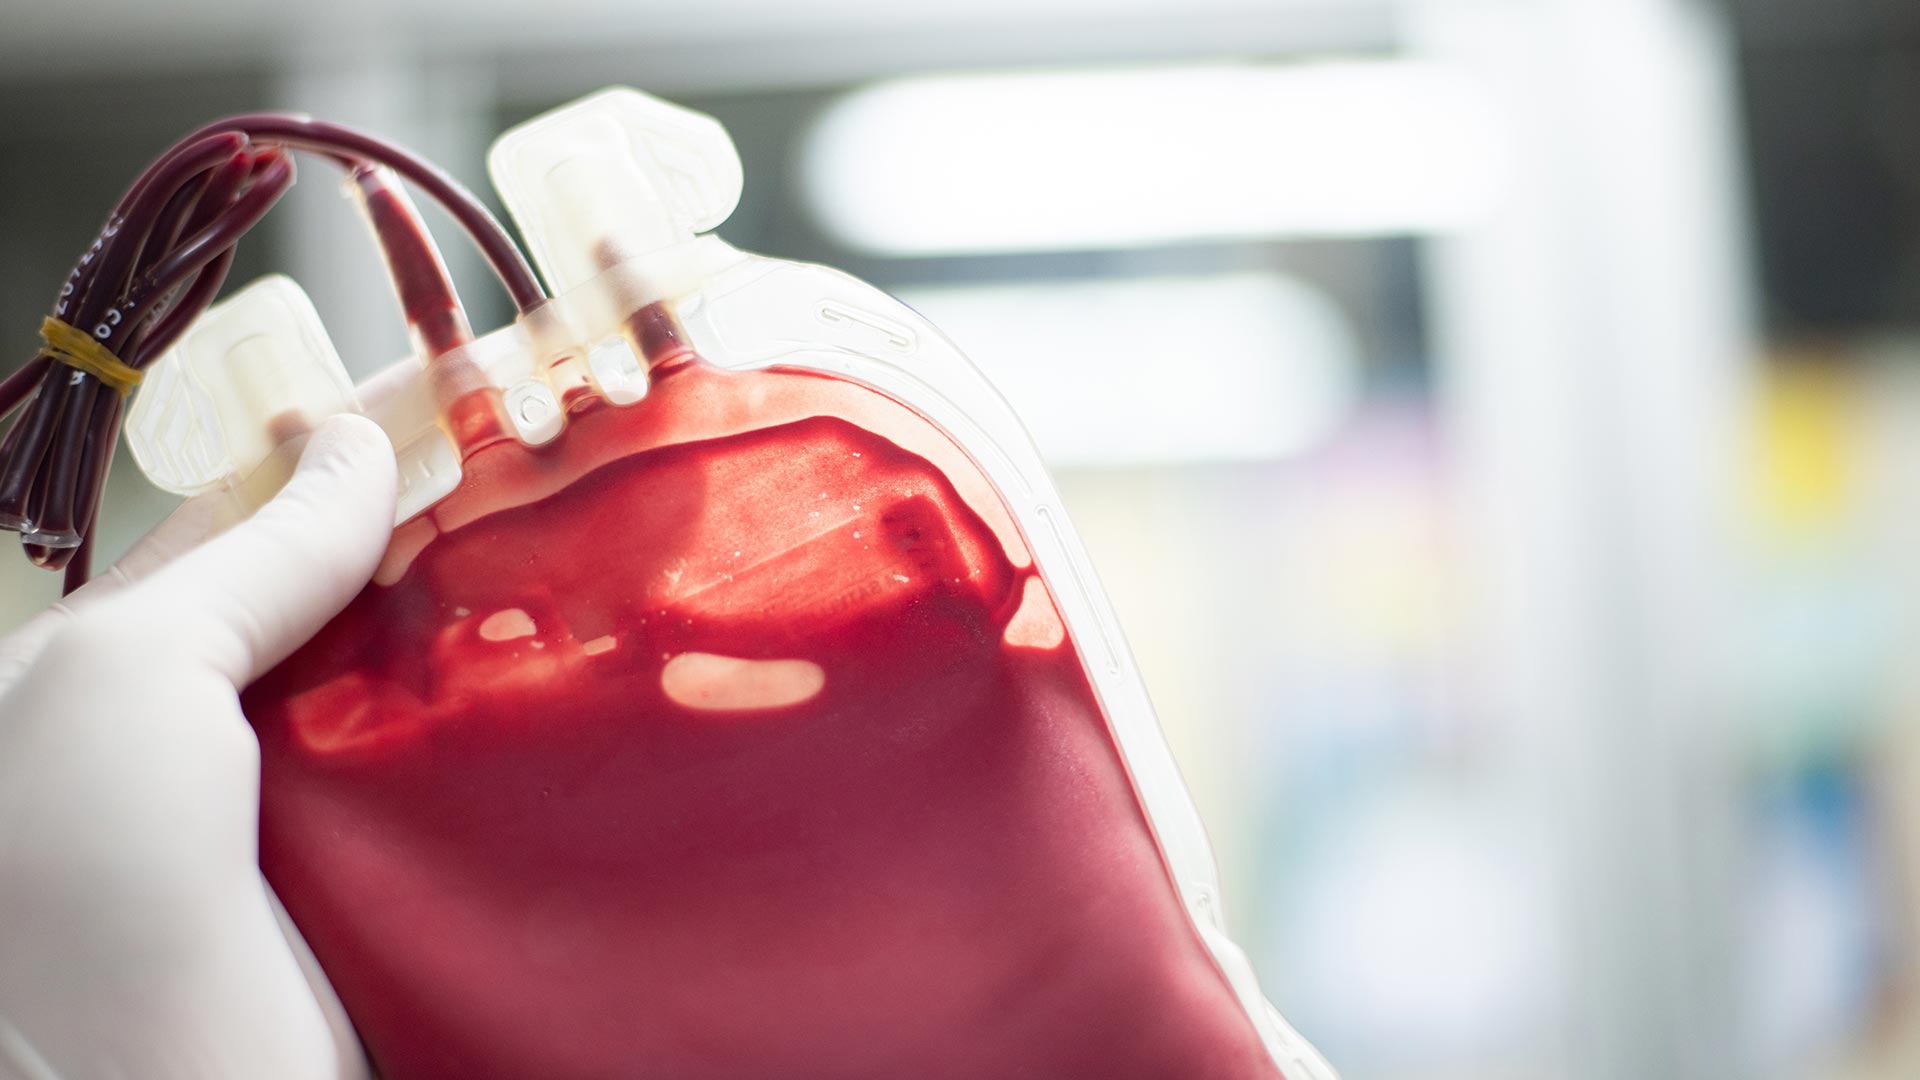 closeup photo of a bag of fresh blood that has been donated